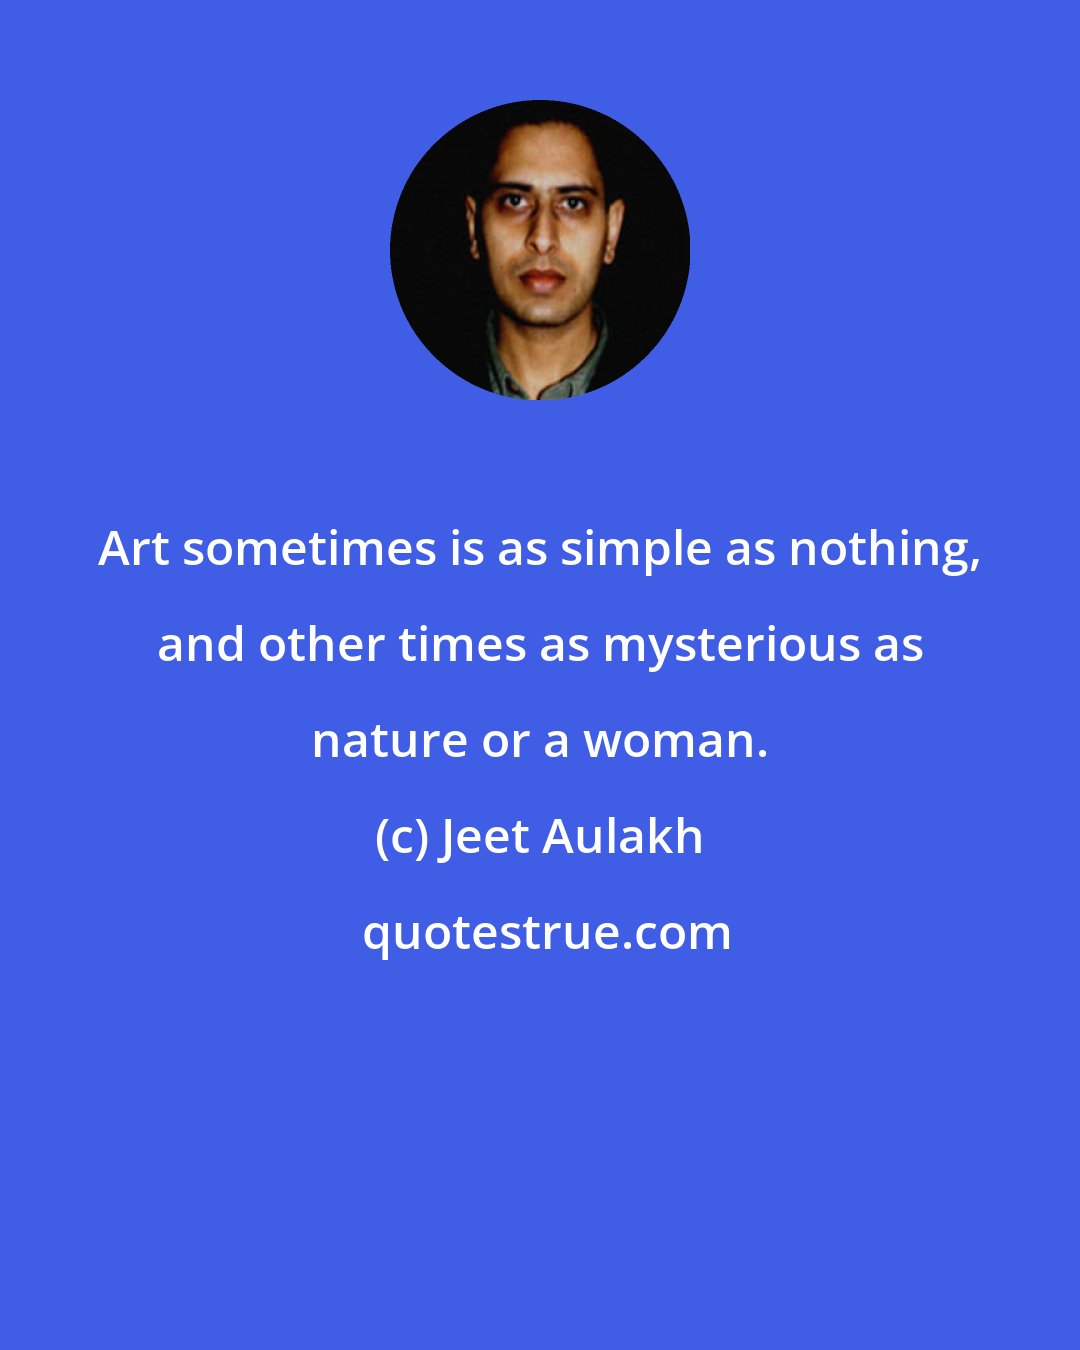 Jeet Aulakh: Art sometimes is as simple as nothing, and other times as mysterious as nature or a woman.